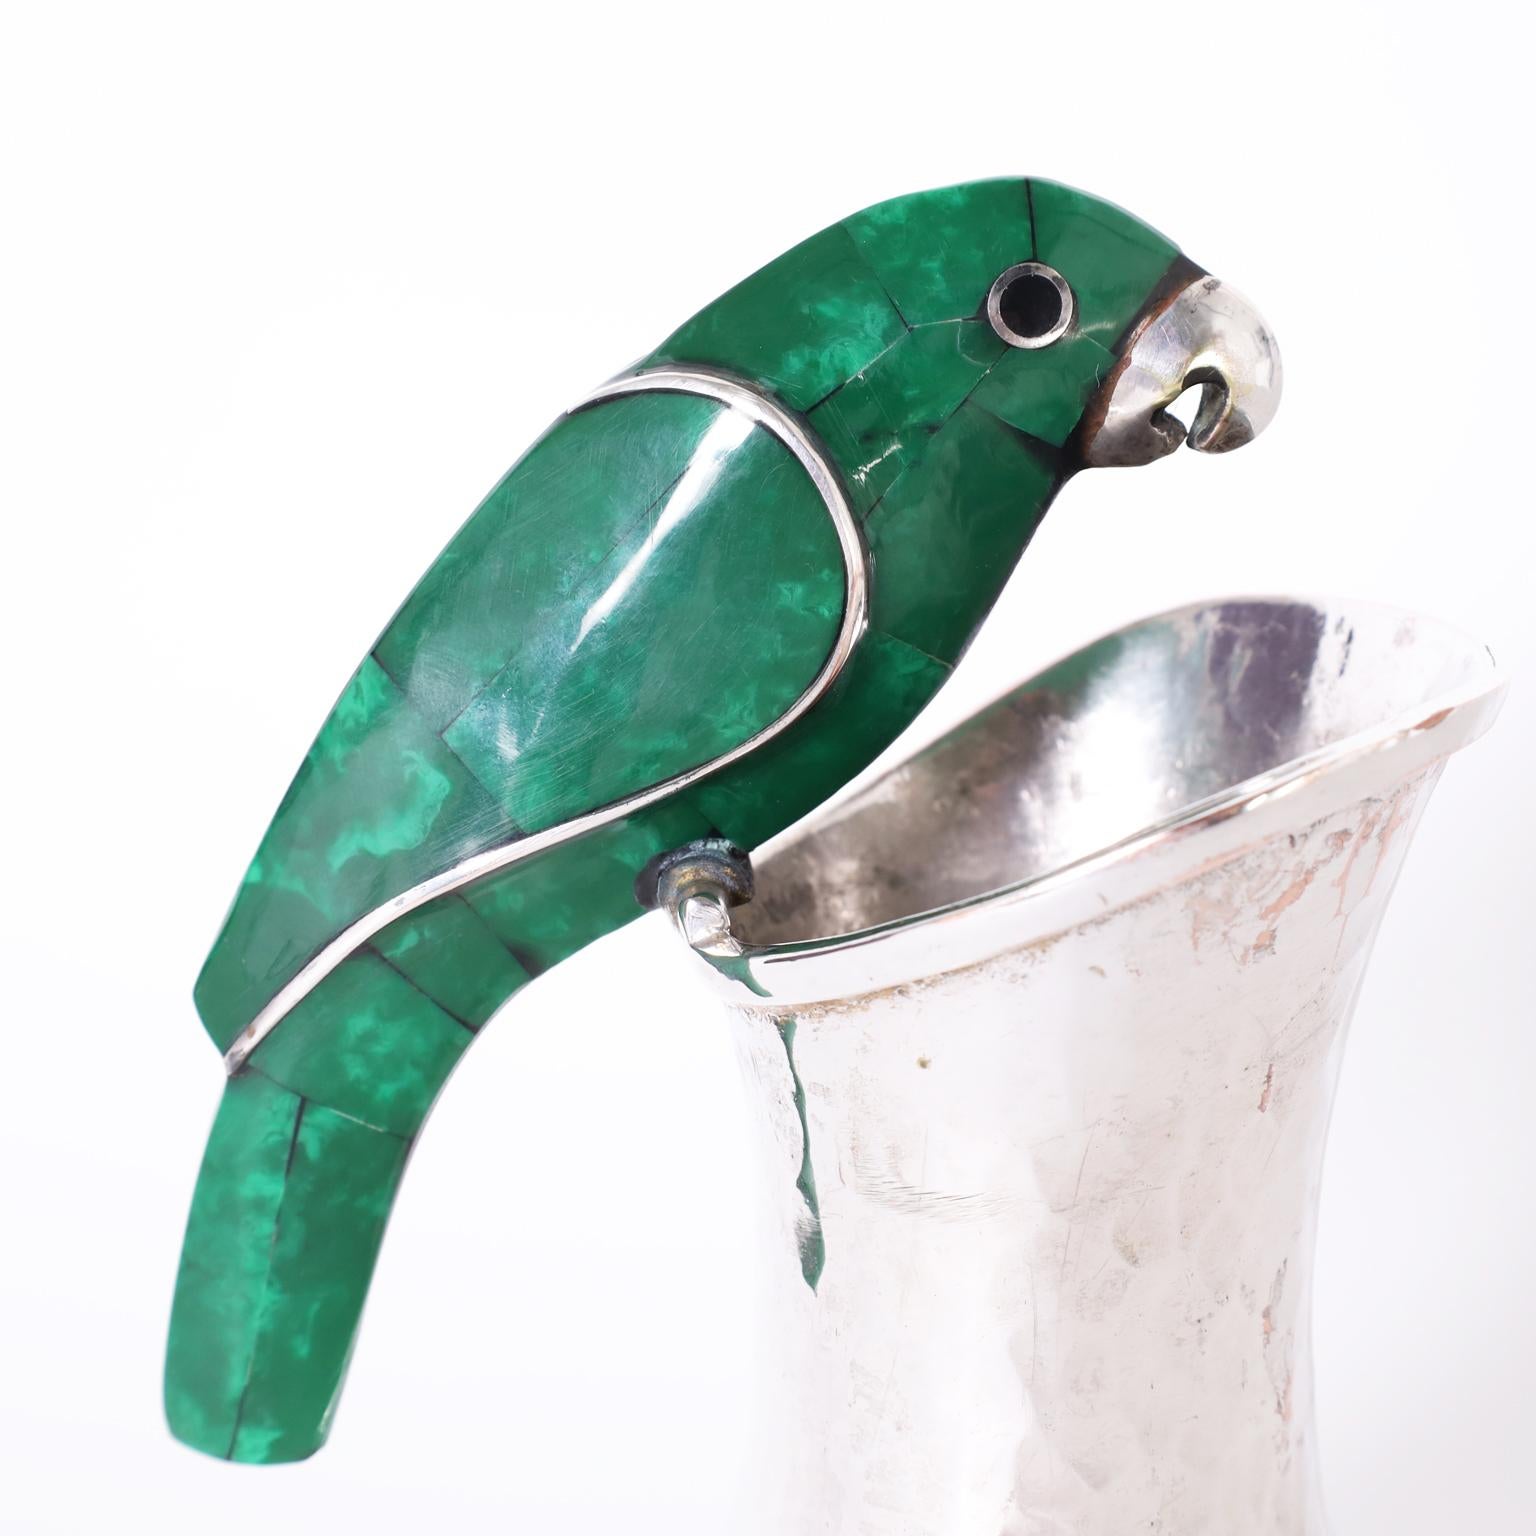 Hand-Crafted Silver Plate Pitcher with Parrot Handle in the Style of Los Castillo